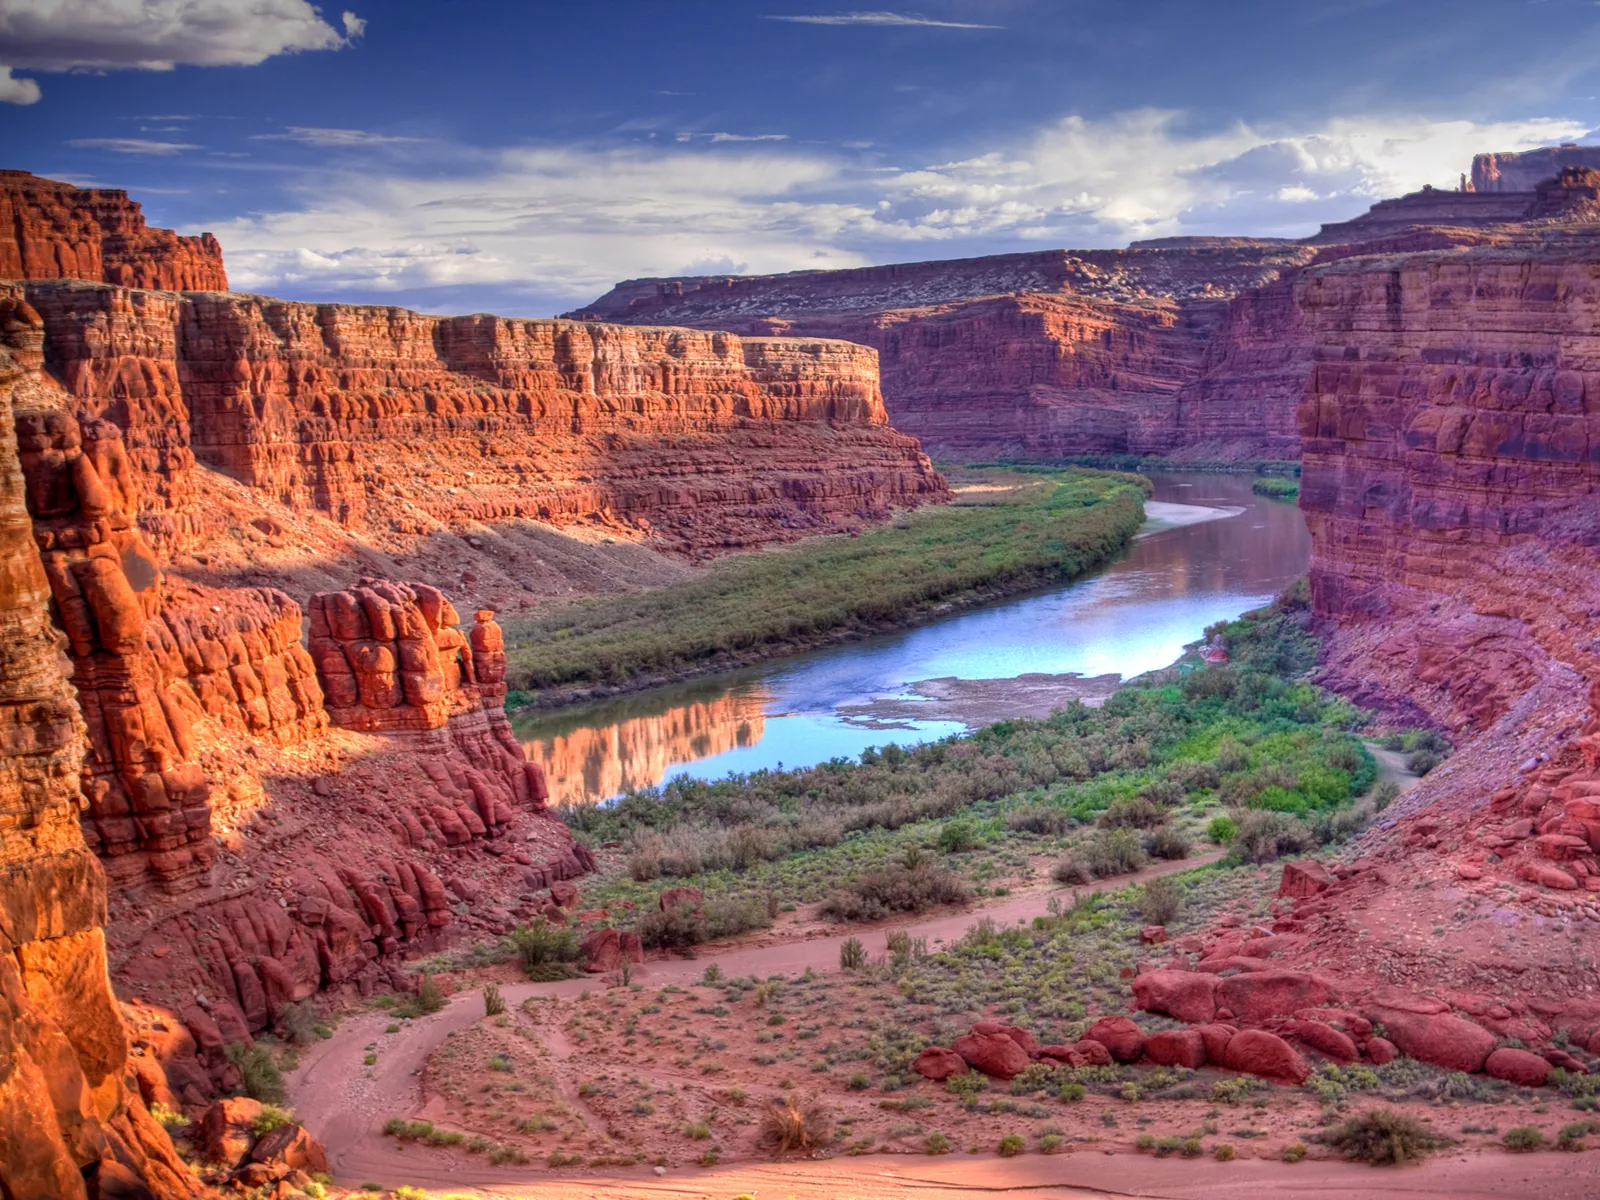 Colorado River running through a canyon in Canyonlands National Park, one of Utah's best places to visit, seen at dusk with red rocks